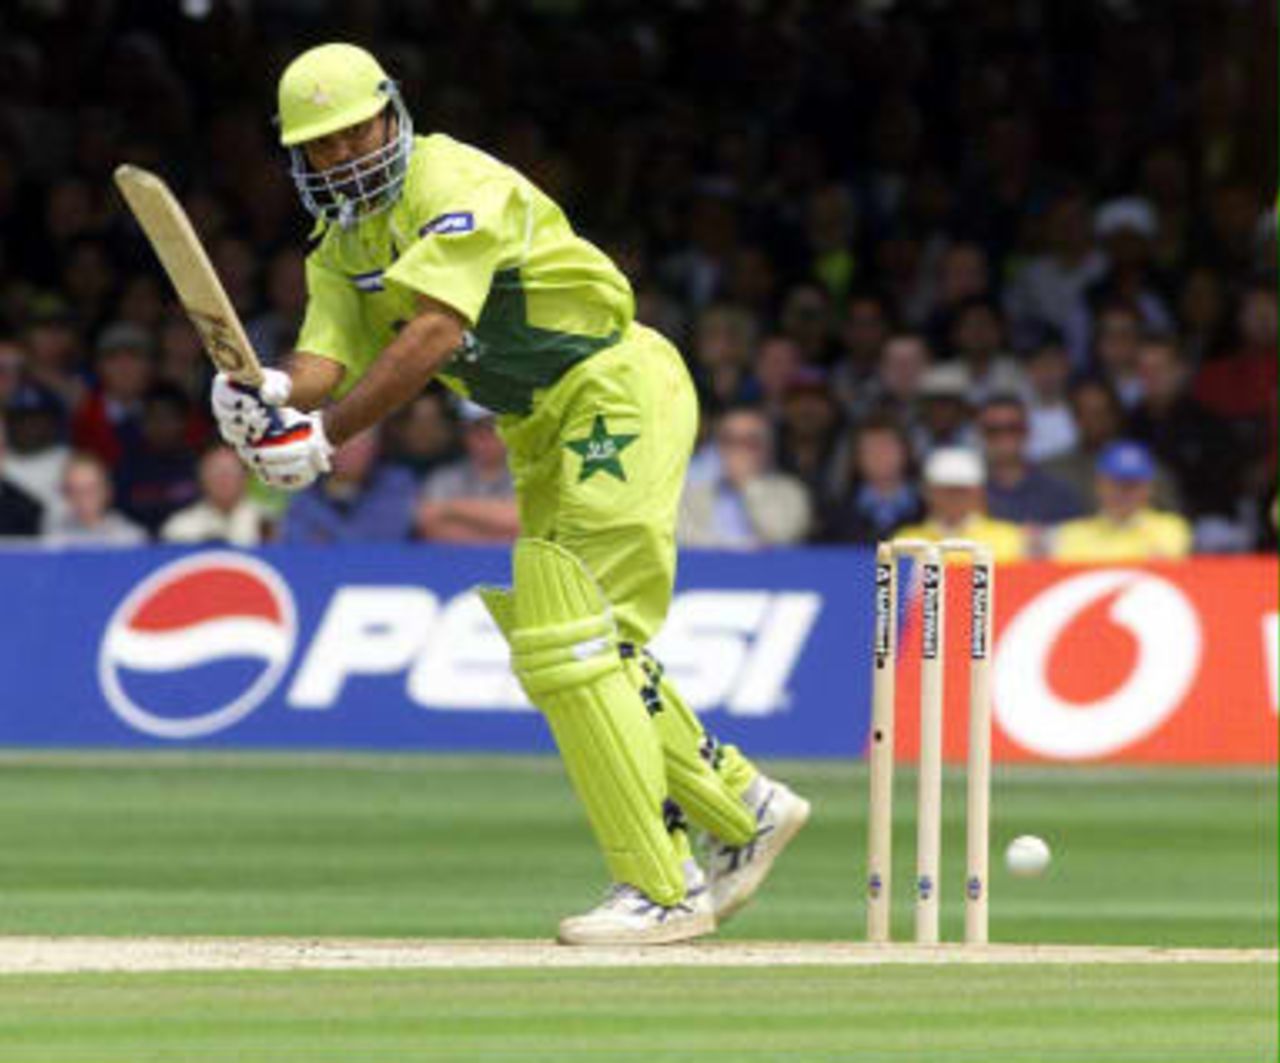 Pakistan's Ijaz Ahmed hits out off the bowling of Australia's Glenn McGrath 20 June 1999 during the Cricket World Cup final at Lord's